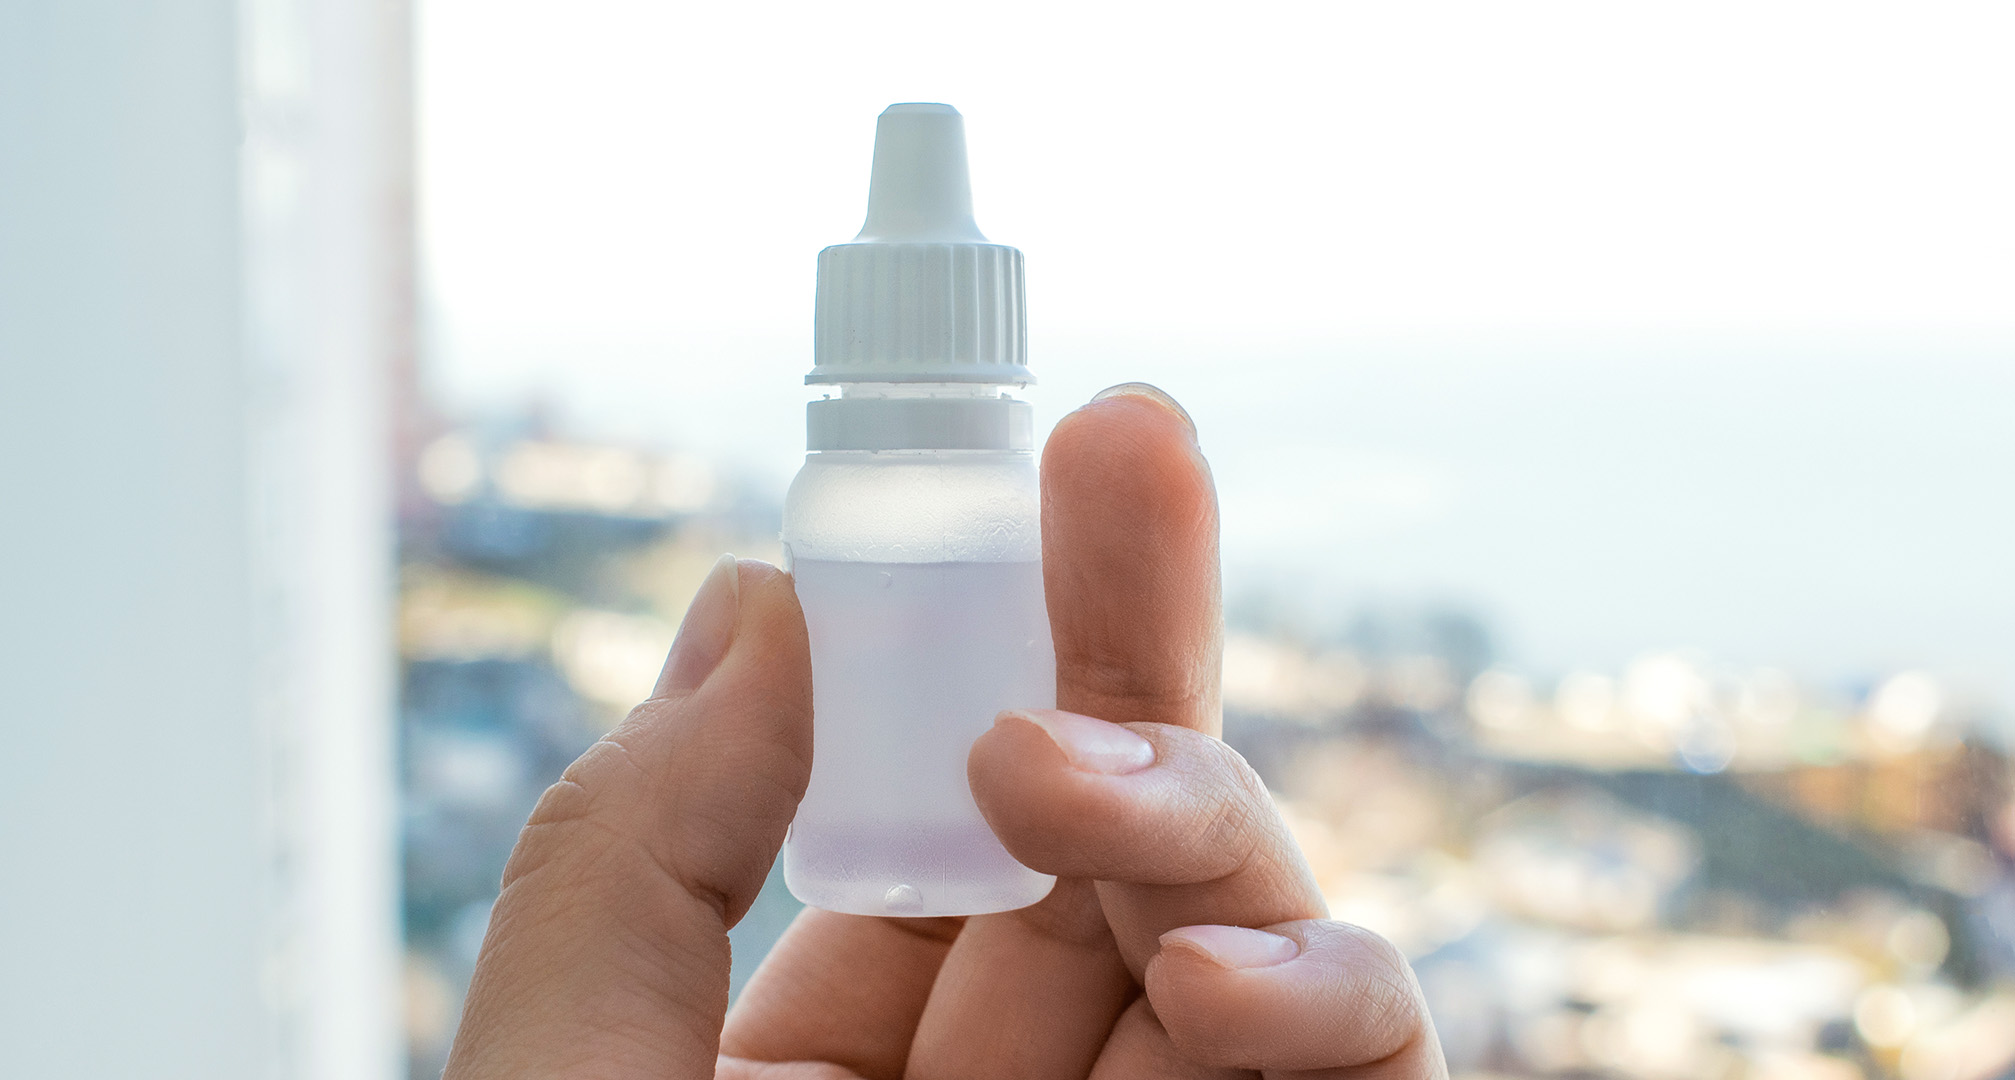 close up image of plain eye drops bottle in front of window